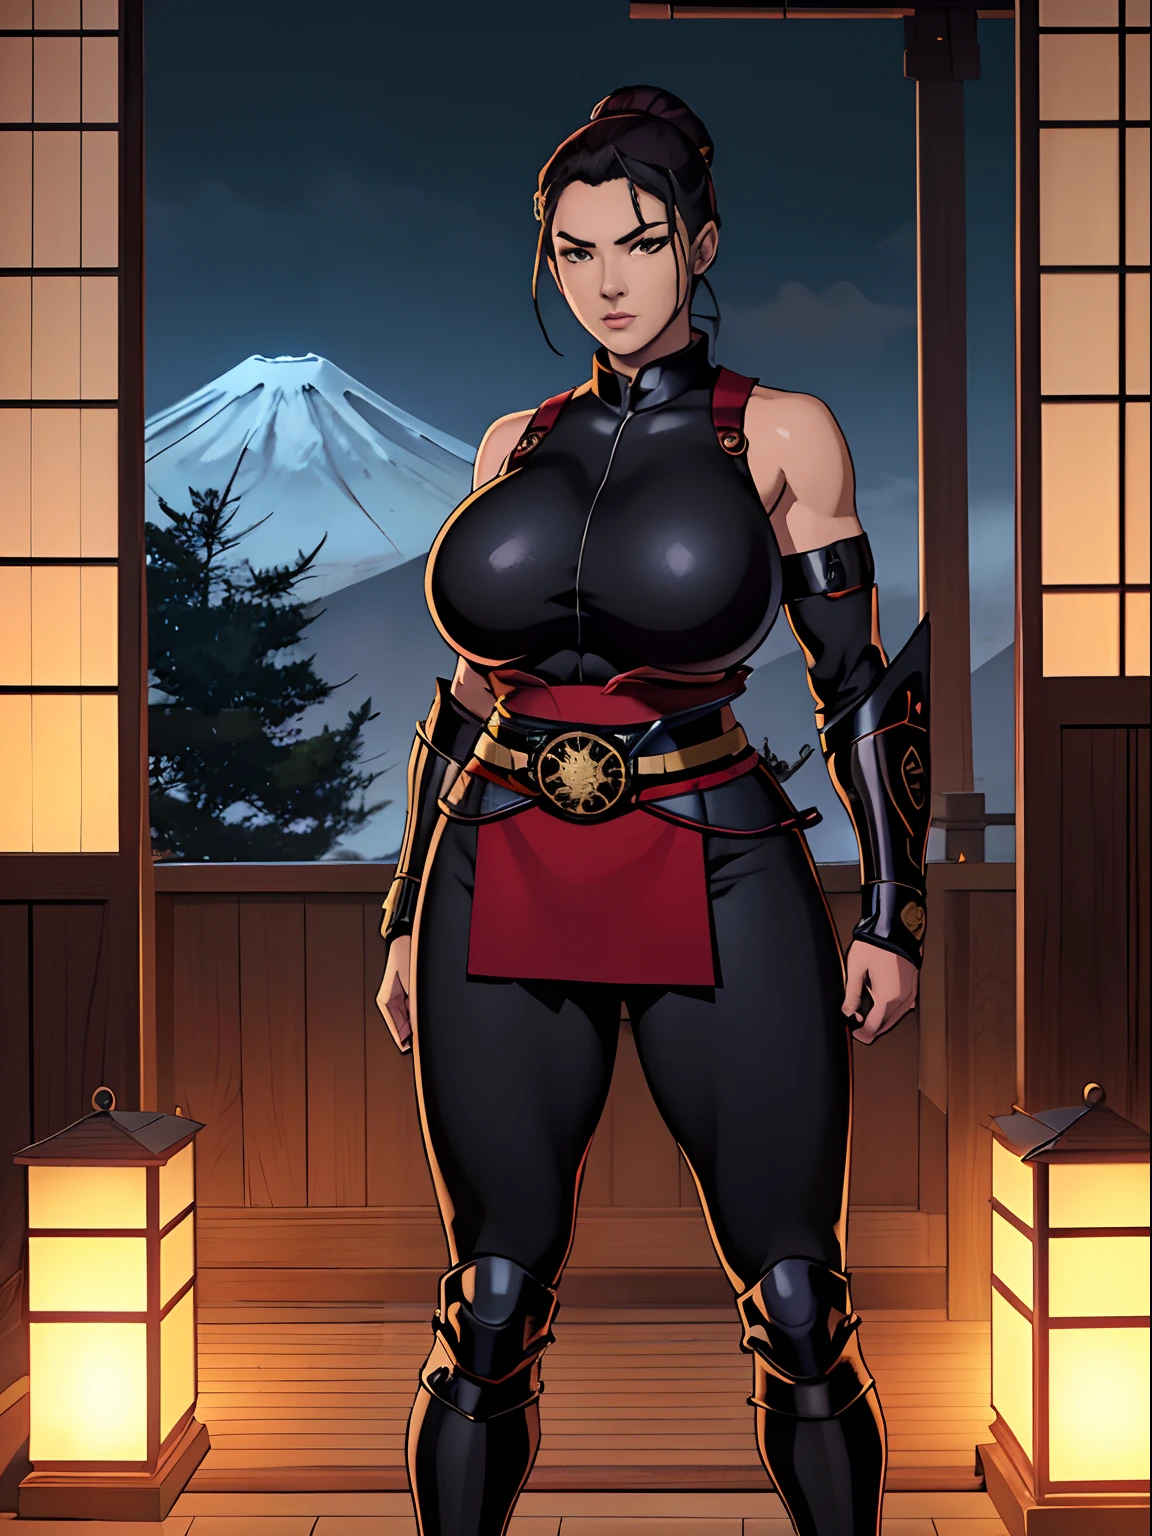 (masterpiece, top quality, best quality, official art, beautiful and aesthetic:1.2), (1girl:1.3), hot Japanese girl, pornstar face, dark brown hair in a tight bun, extremely detailed, portrait, looking at viewer, solo, (full body:0.6), detailed background, close up, (warm summer Feudal Japan theme:1.1), samurai, charlatan, mysterious, standing in a garden, samurai armor, samurai helmet, crest, pauldrons, hip armor, breastplate, greaves, bracers, gloves, katana, banner, metal, black leather, breeches, leggings, loose pants, bracers, armor, gauntlets, boots, buckles, straps, ((((gigantic breasts)))), slim waist, slim hips, long legs, sunset, Feudal Japan, Mount Fuji, (Japanese garden exterior:1.1) background, dark mysterious lighting, shadows, magical atmosphere, dutch angle,